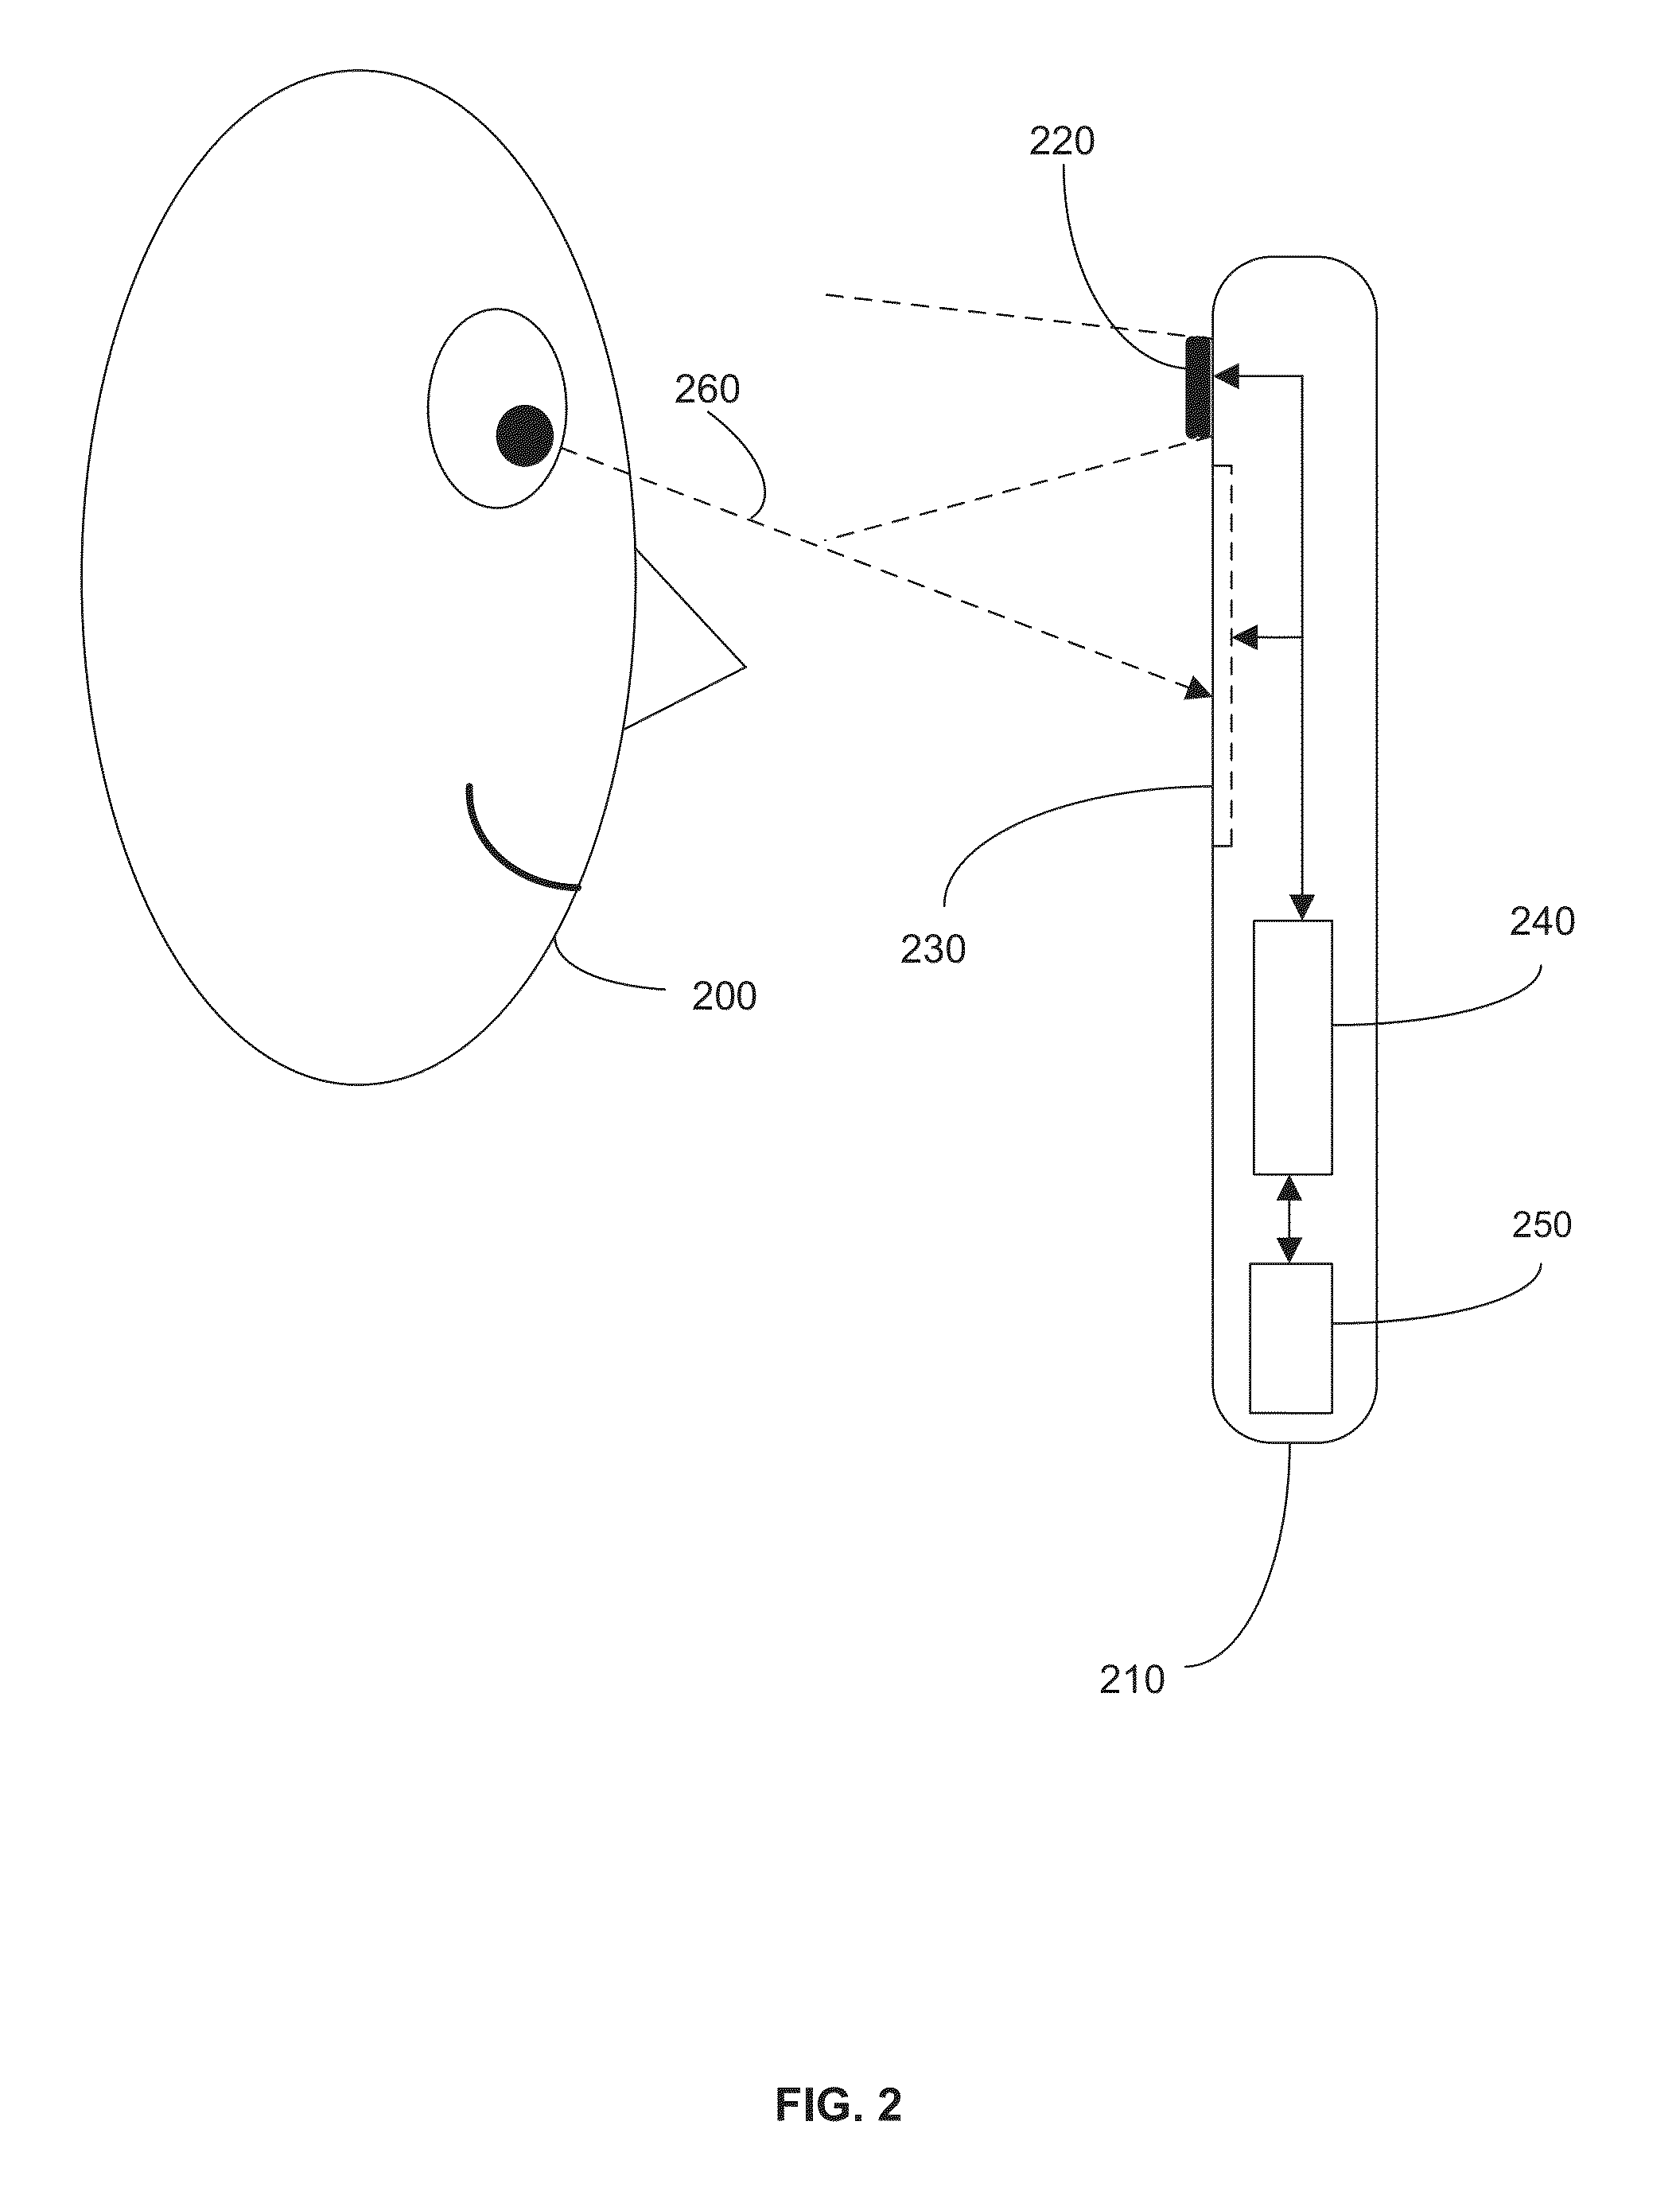 Method and system of scoring documents based on attributes obtained from a digital document by eye-tracking data analysis